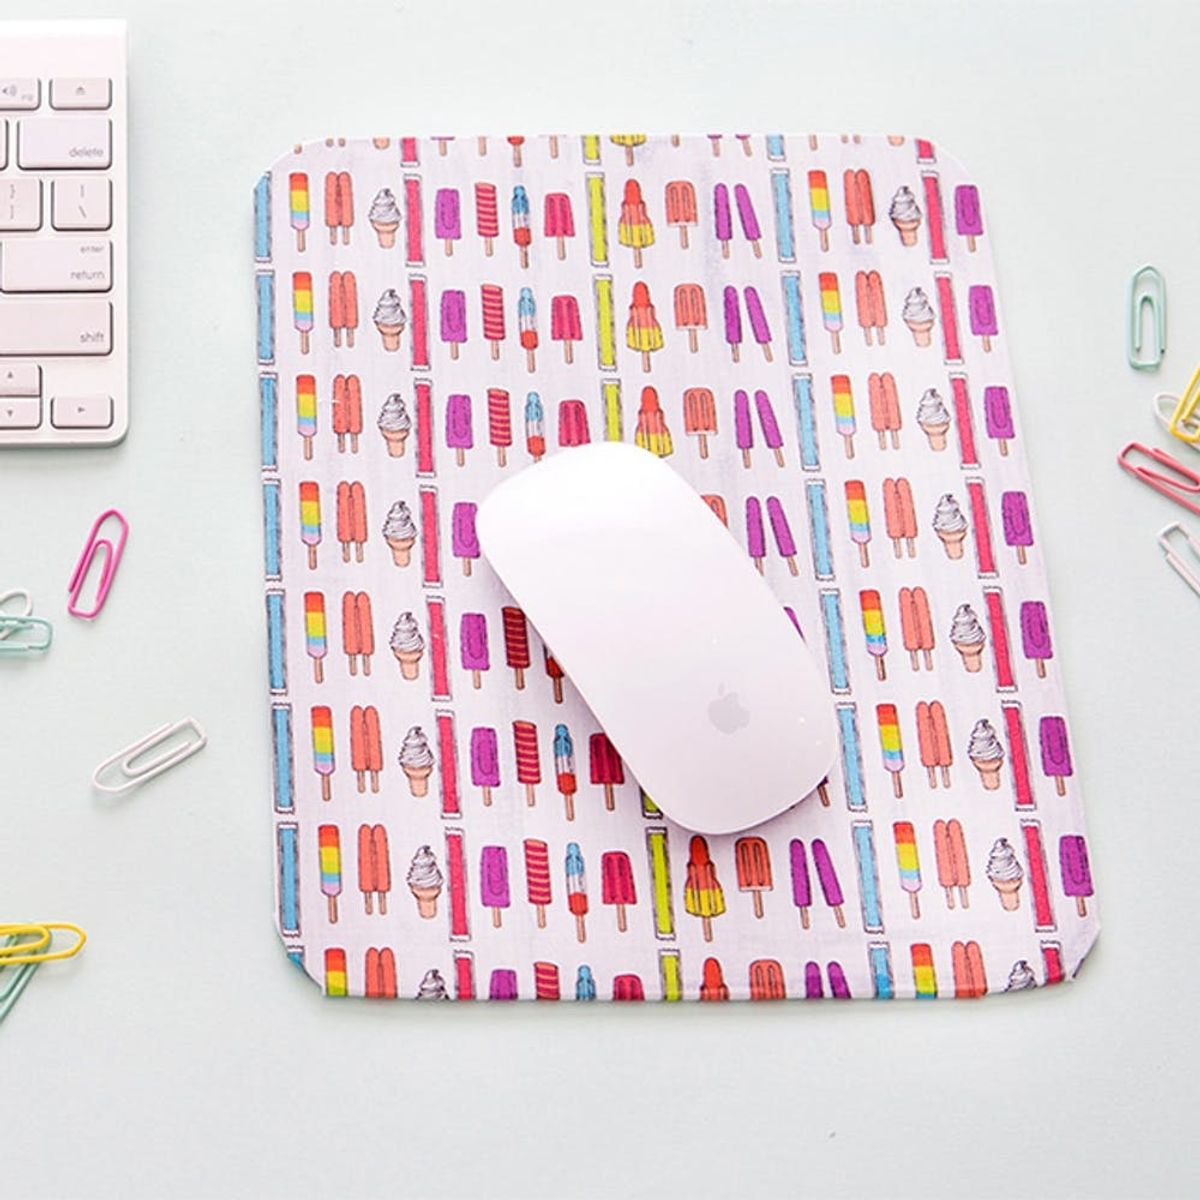 Give Your Workspace a Refresh With This DIY Mousepad